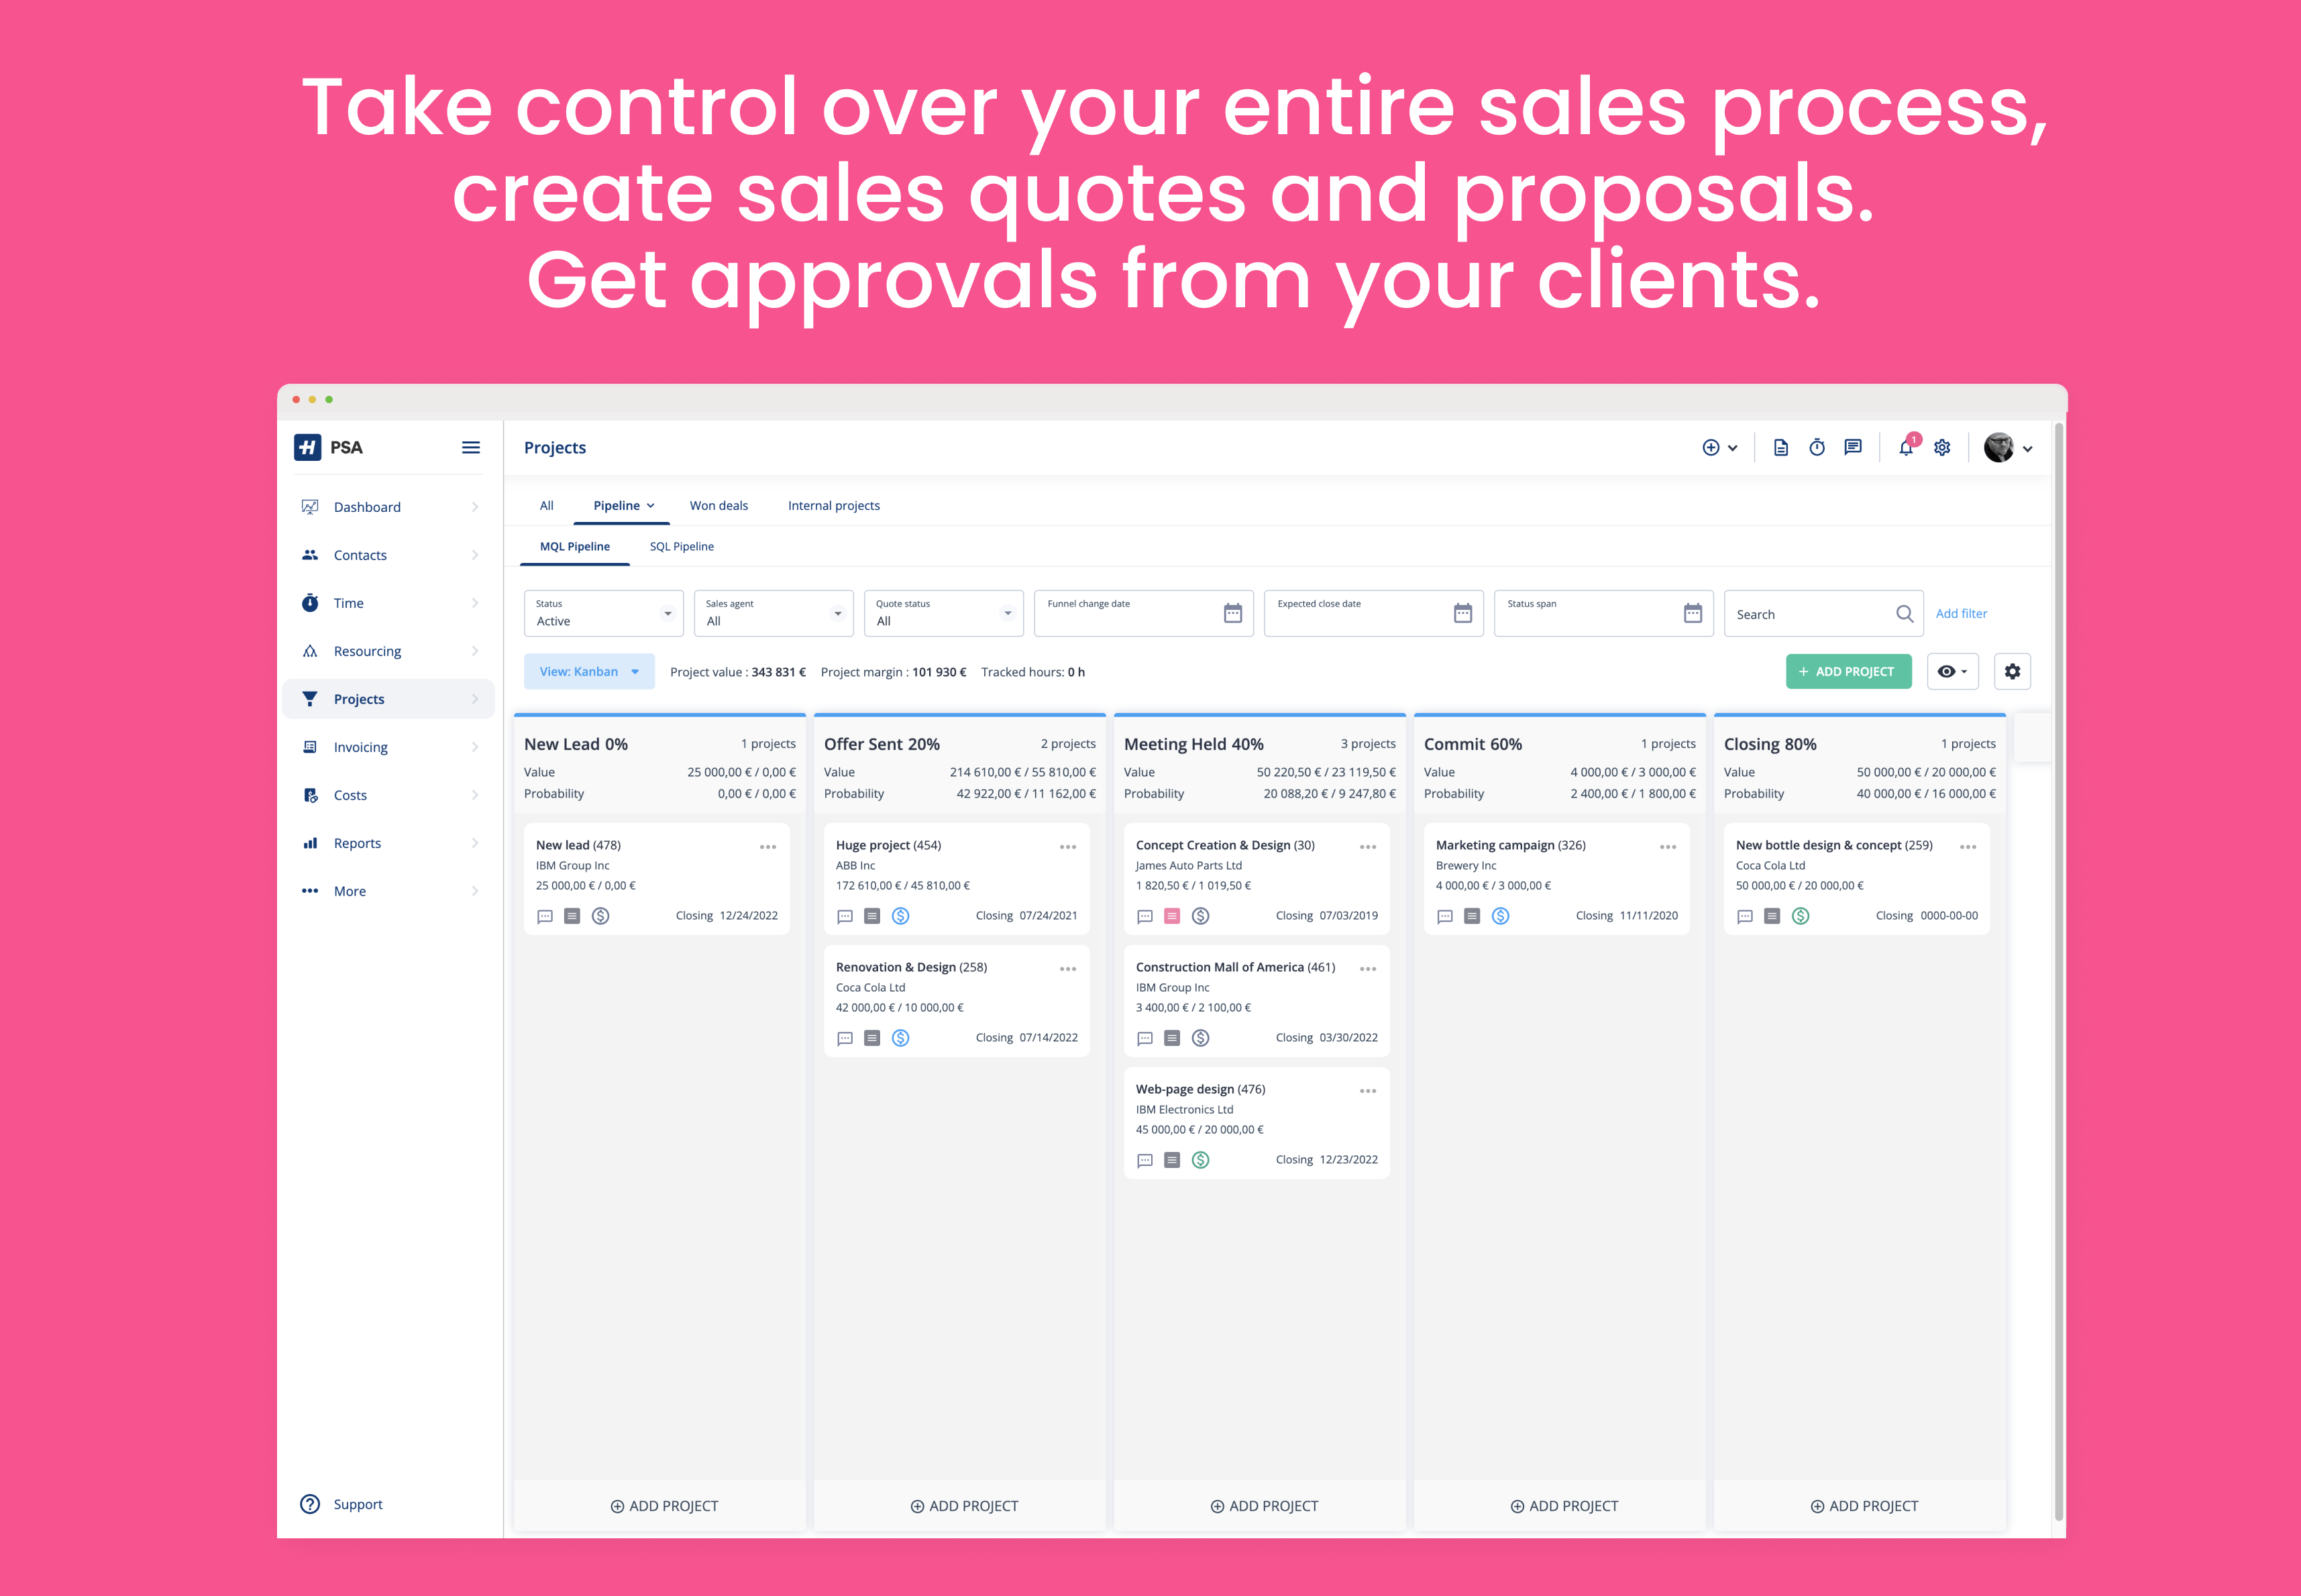 Sales pipeline, sales quotes and appovals from clients